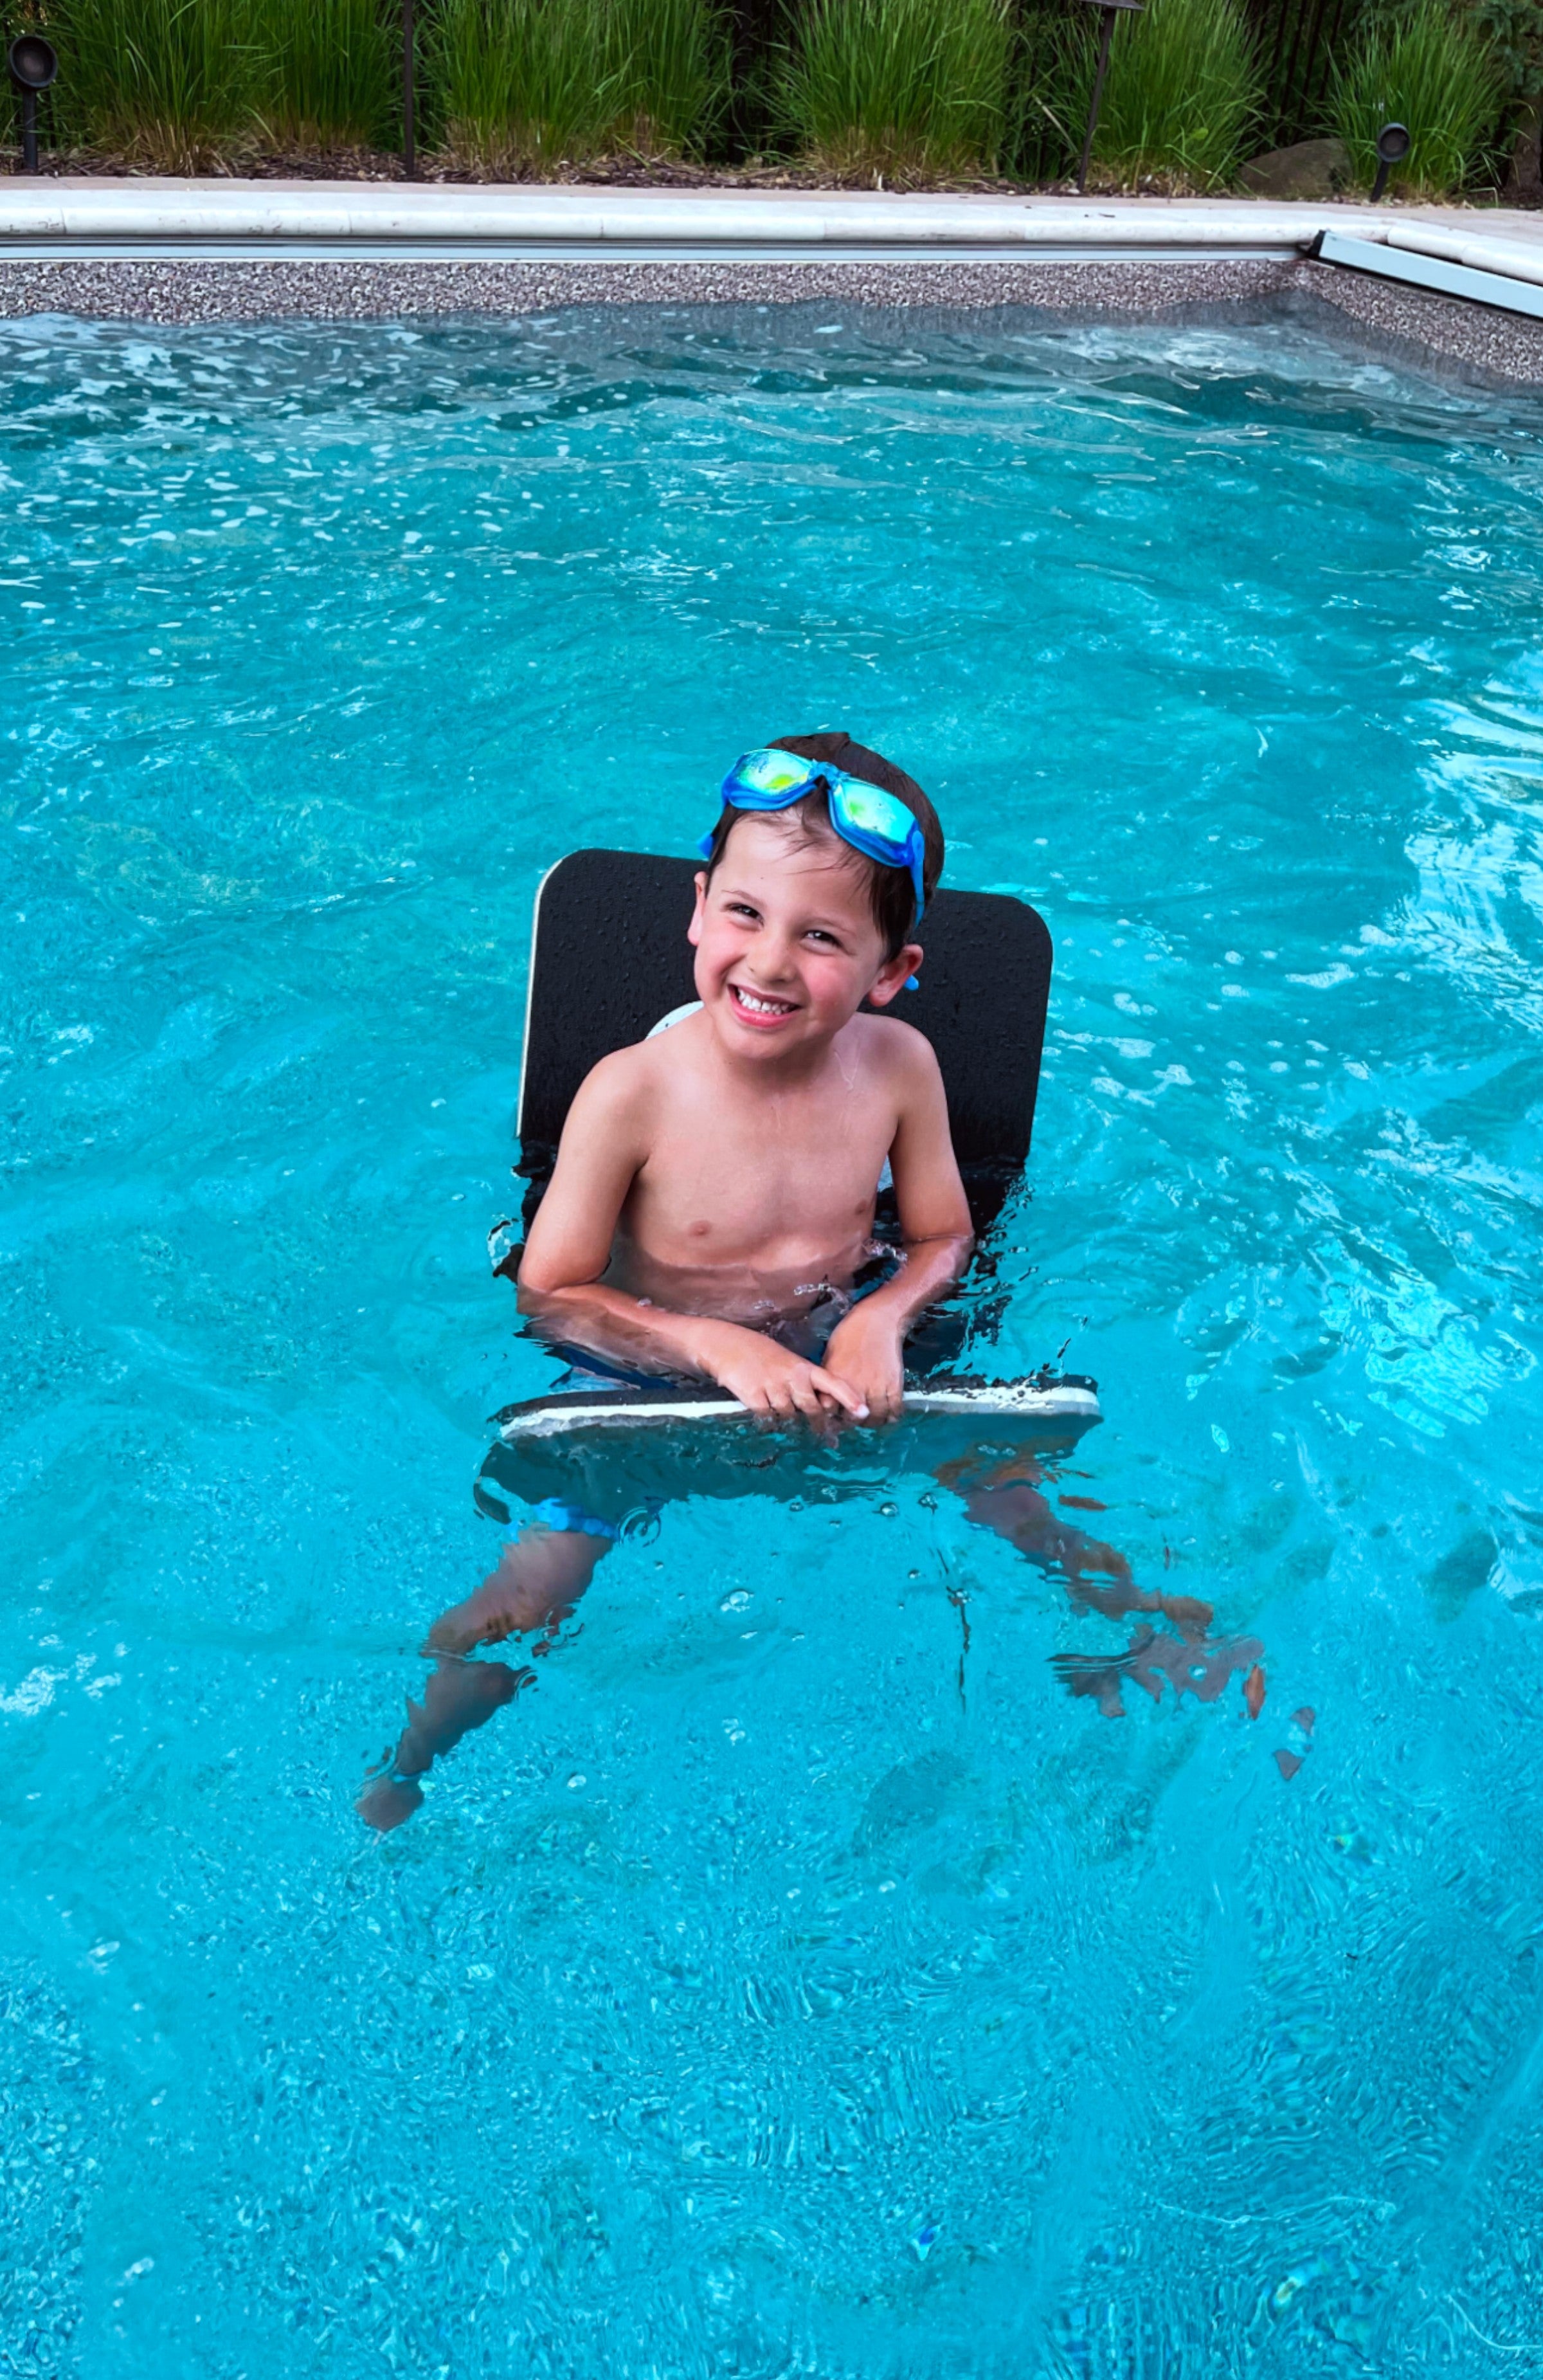 Water accessories: Child playing in a pool using the lake float saddles.